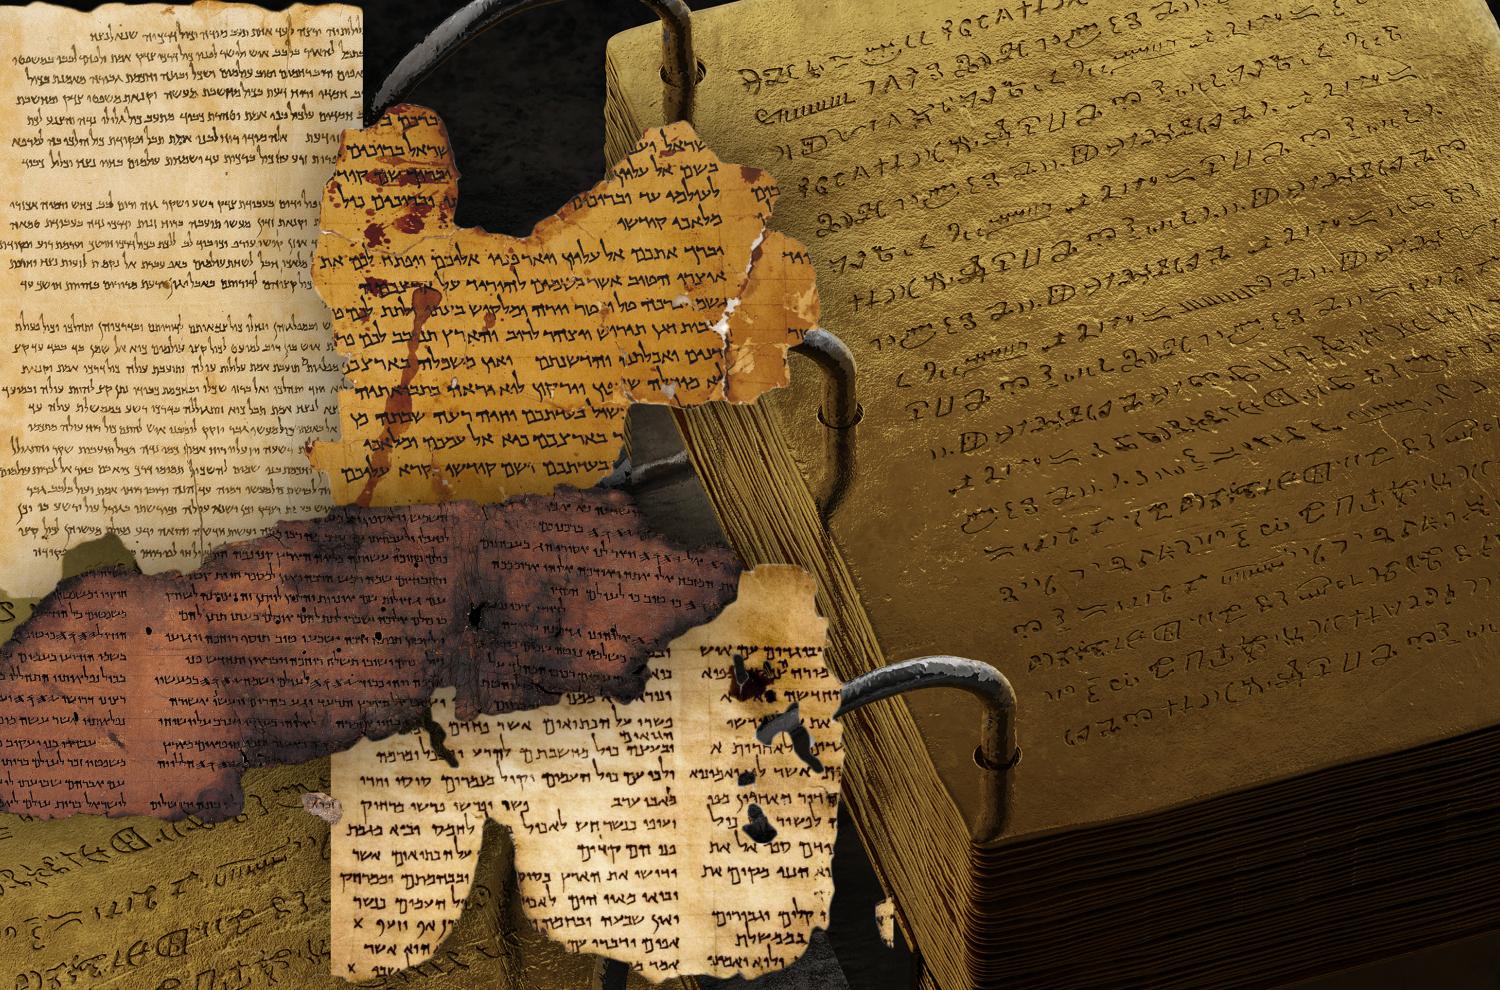 3D Rendering of Gold Plates by Laci Gibbs. Fragments of the Dead Sea Scrolls.